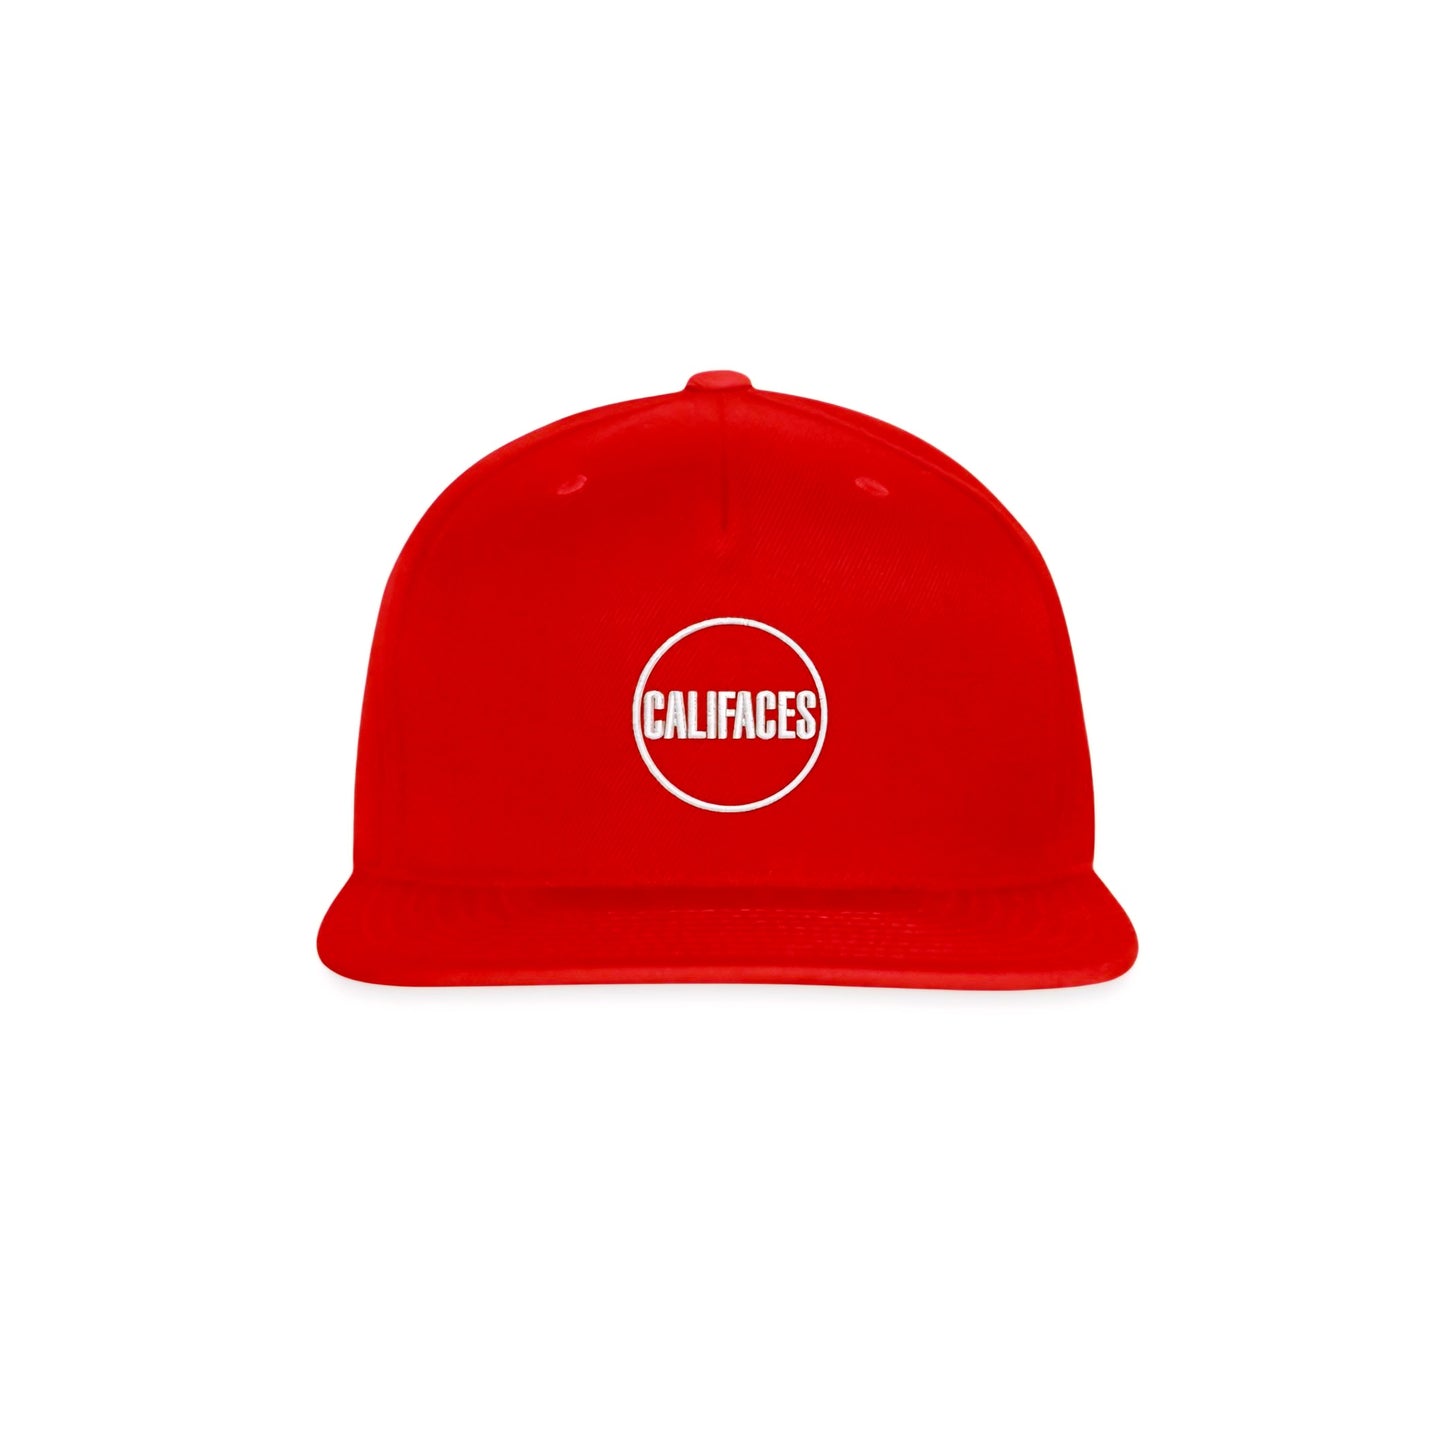 CaliFaces Hats